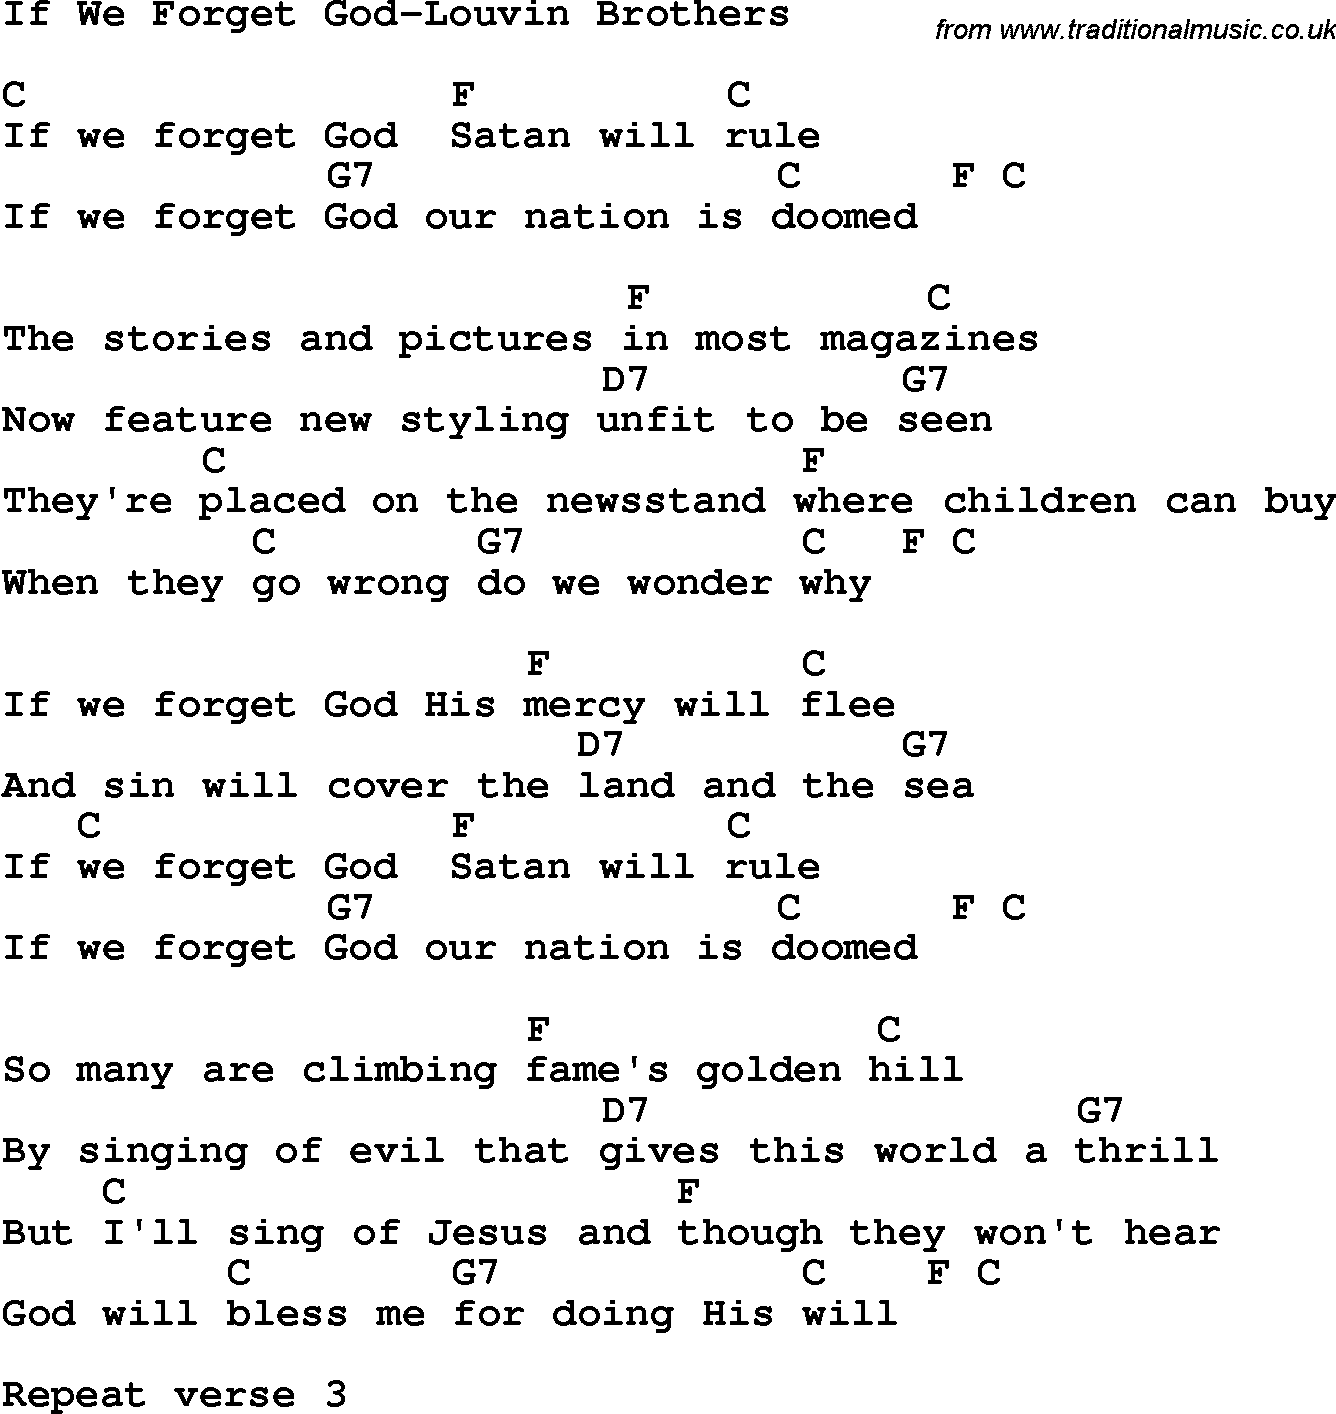 Country, Southern and Bluegrass Gospel Song If We Forget God-Louvin Brothers lyrics and chords